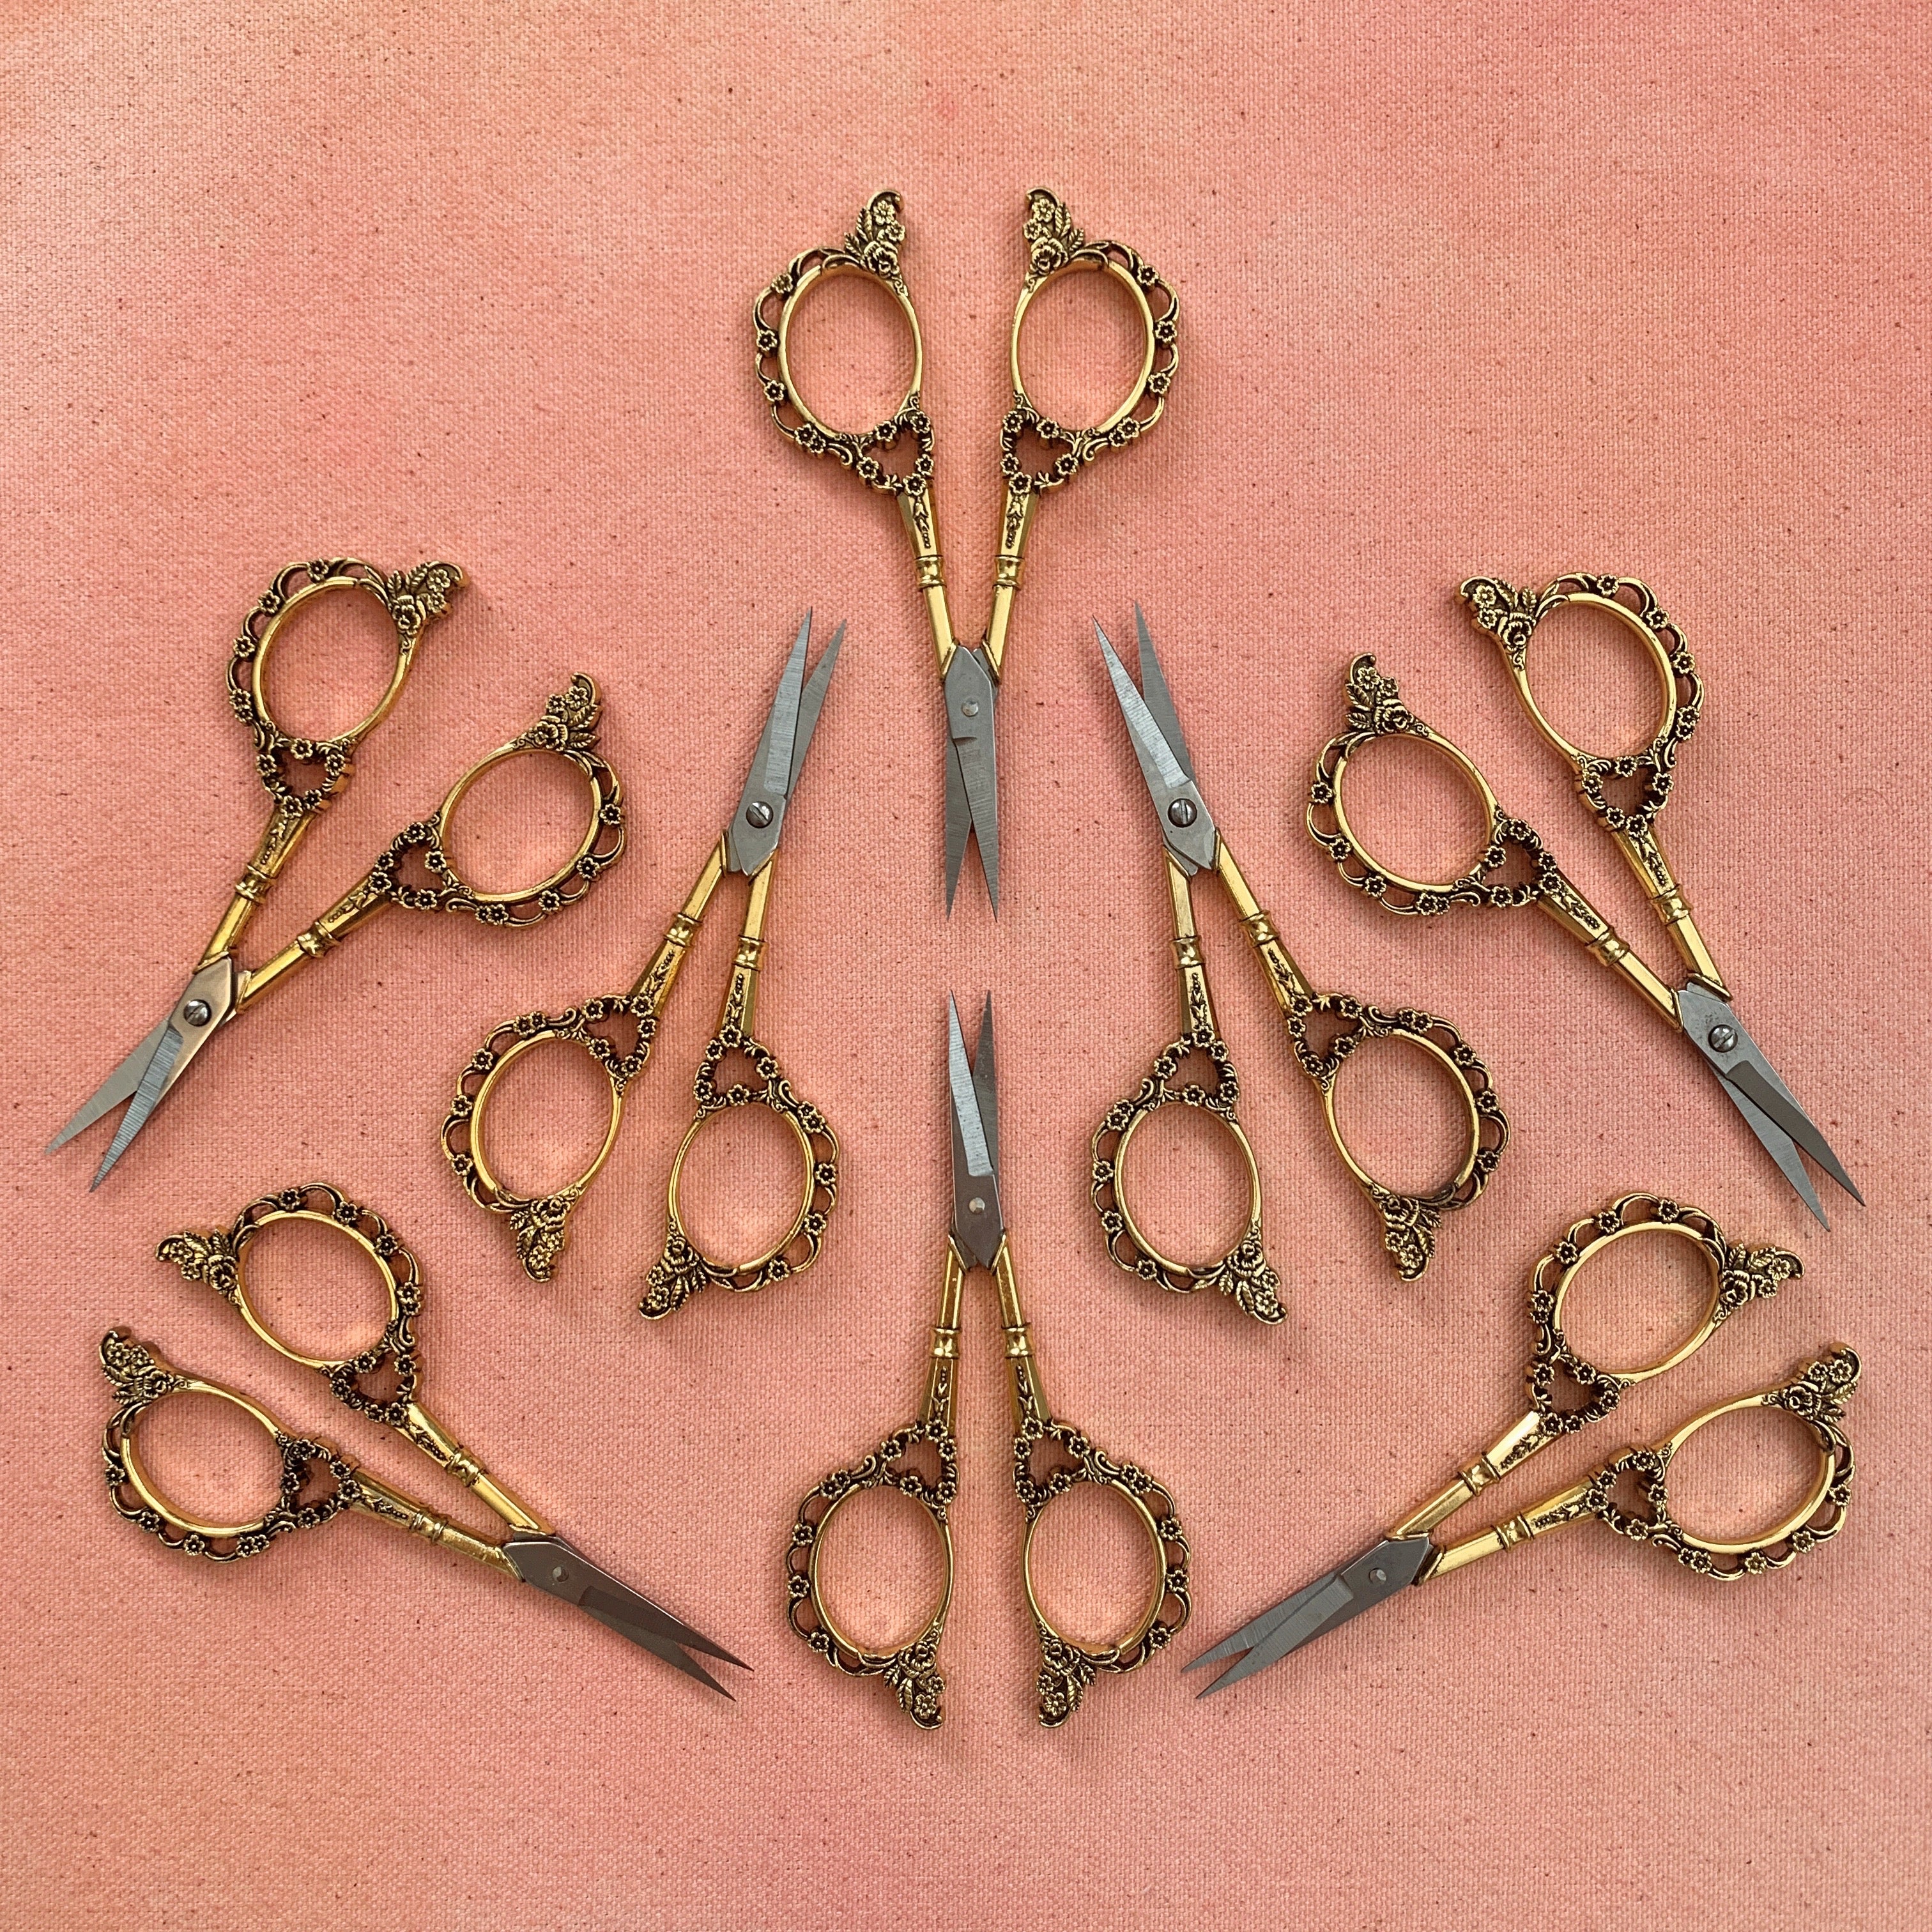 Floral Embroidery Scissors - Small Flower Scissors- Rose Gold